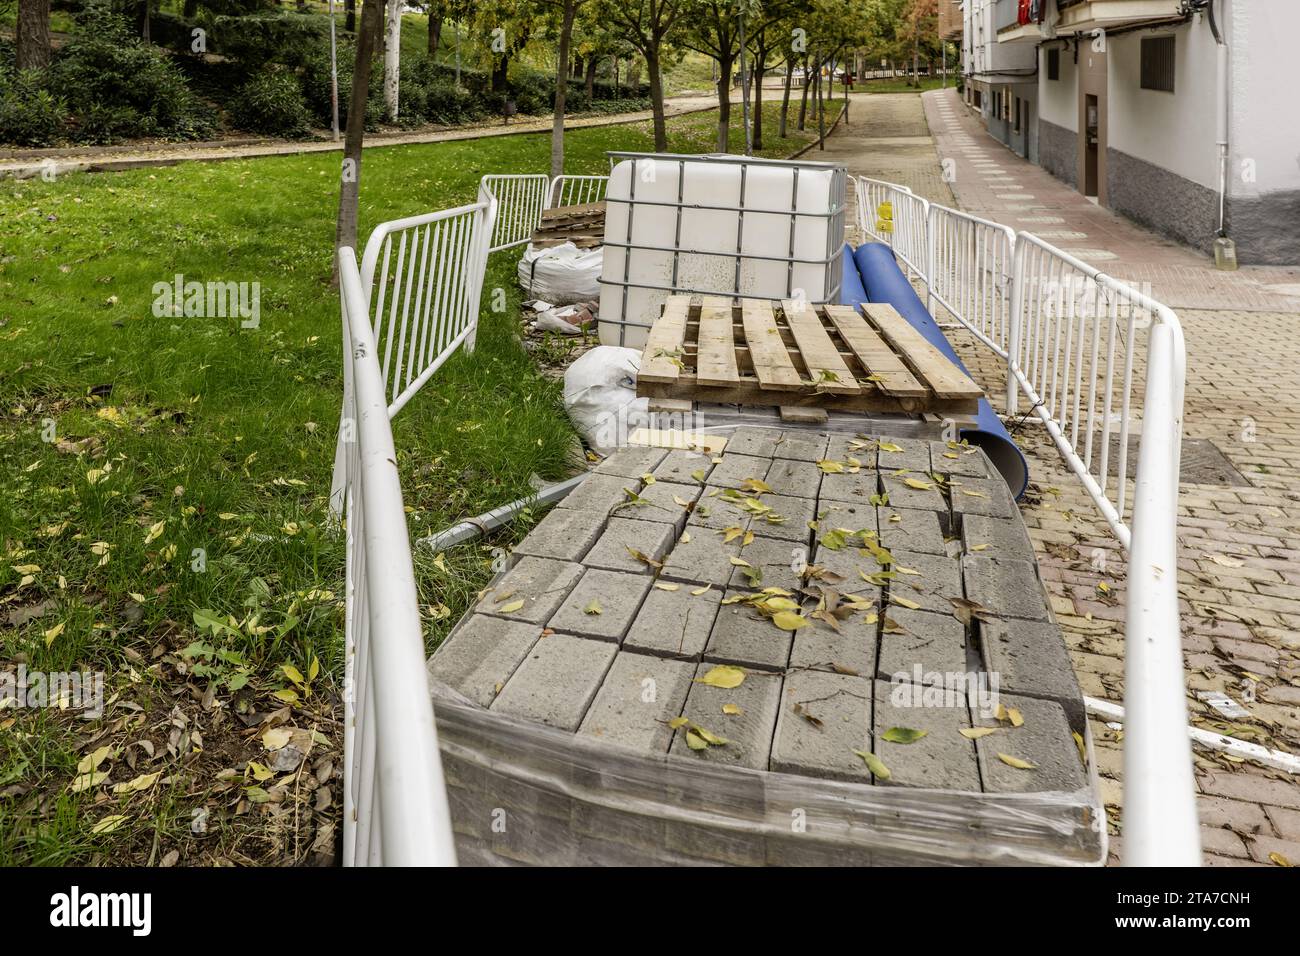 Some pallets full of paving stones Stock Photo